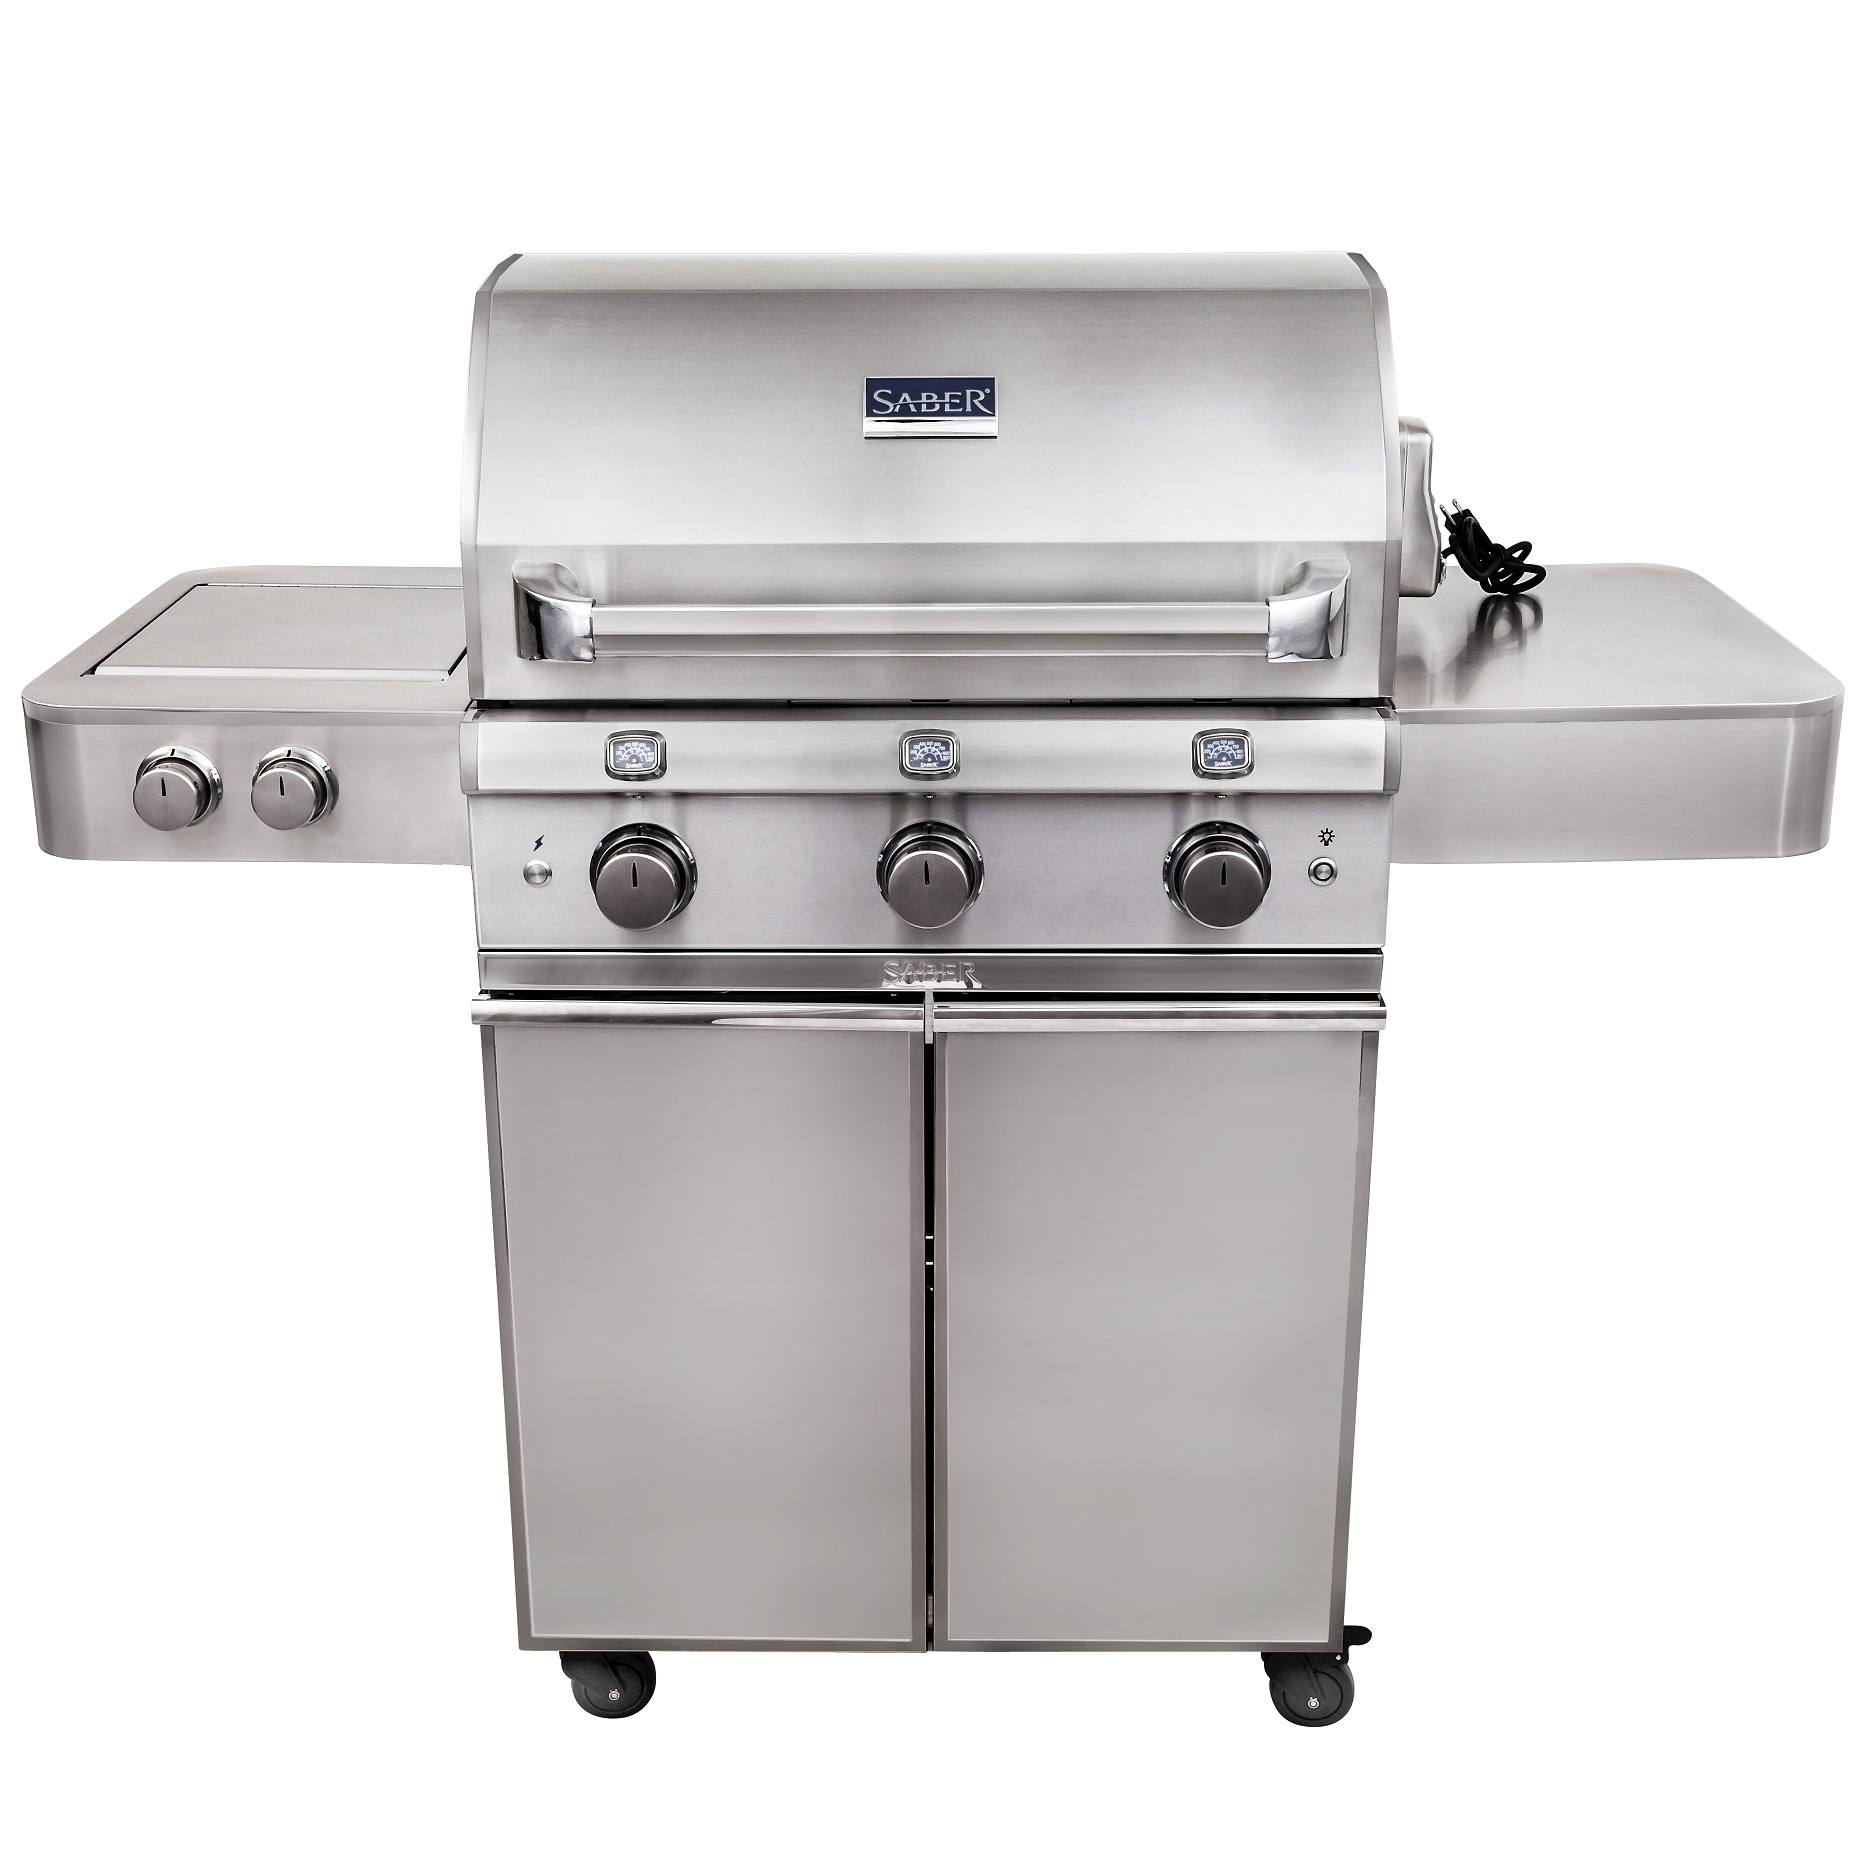 The 10 Best Mid Range Gas Grills to Buy in 2018